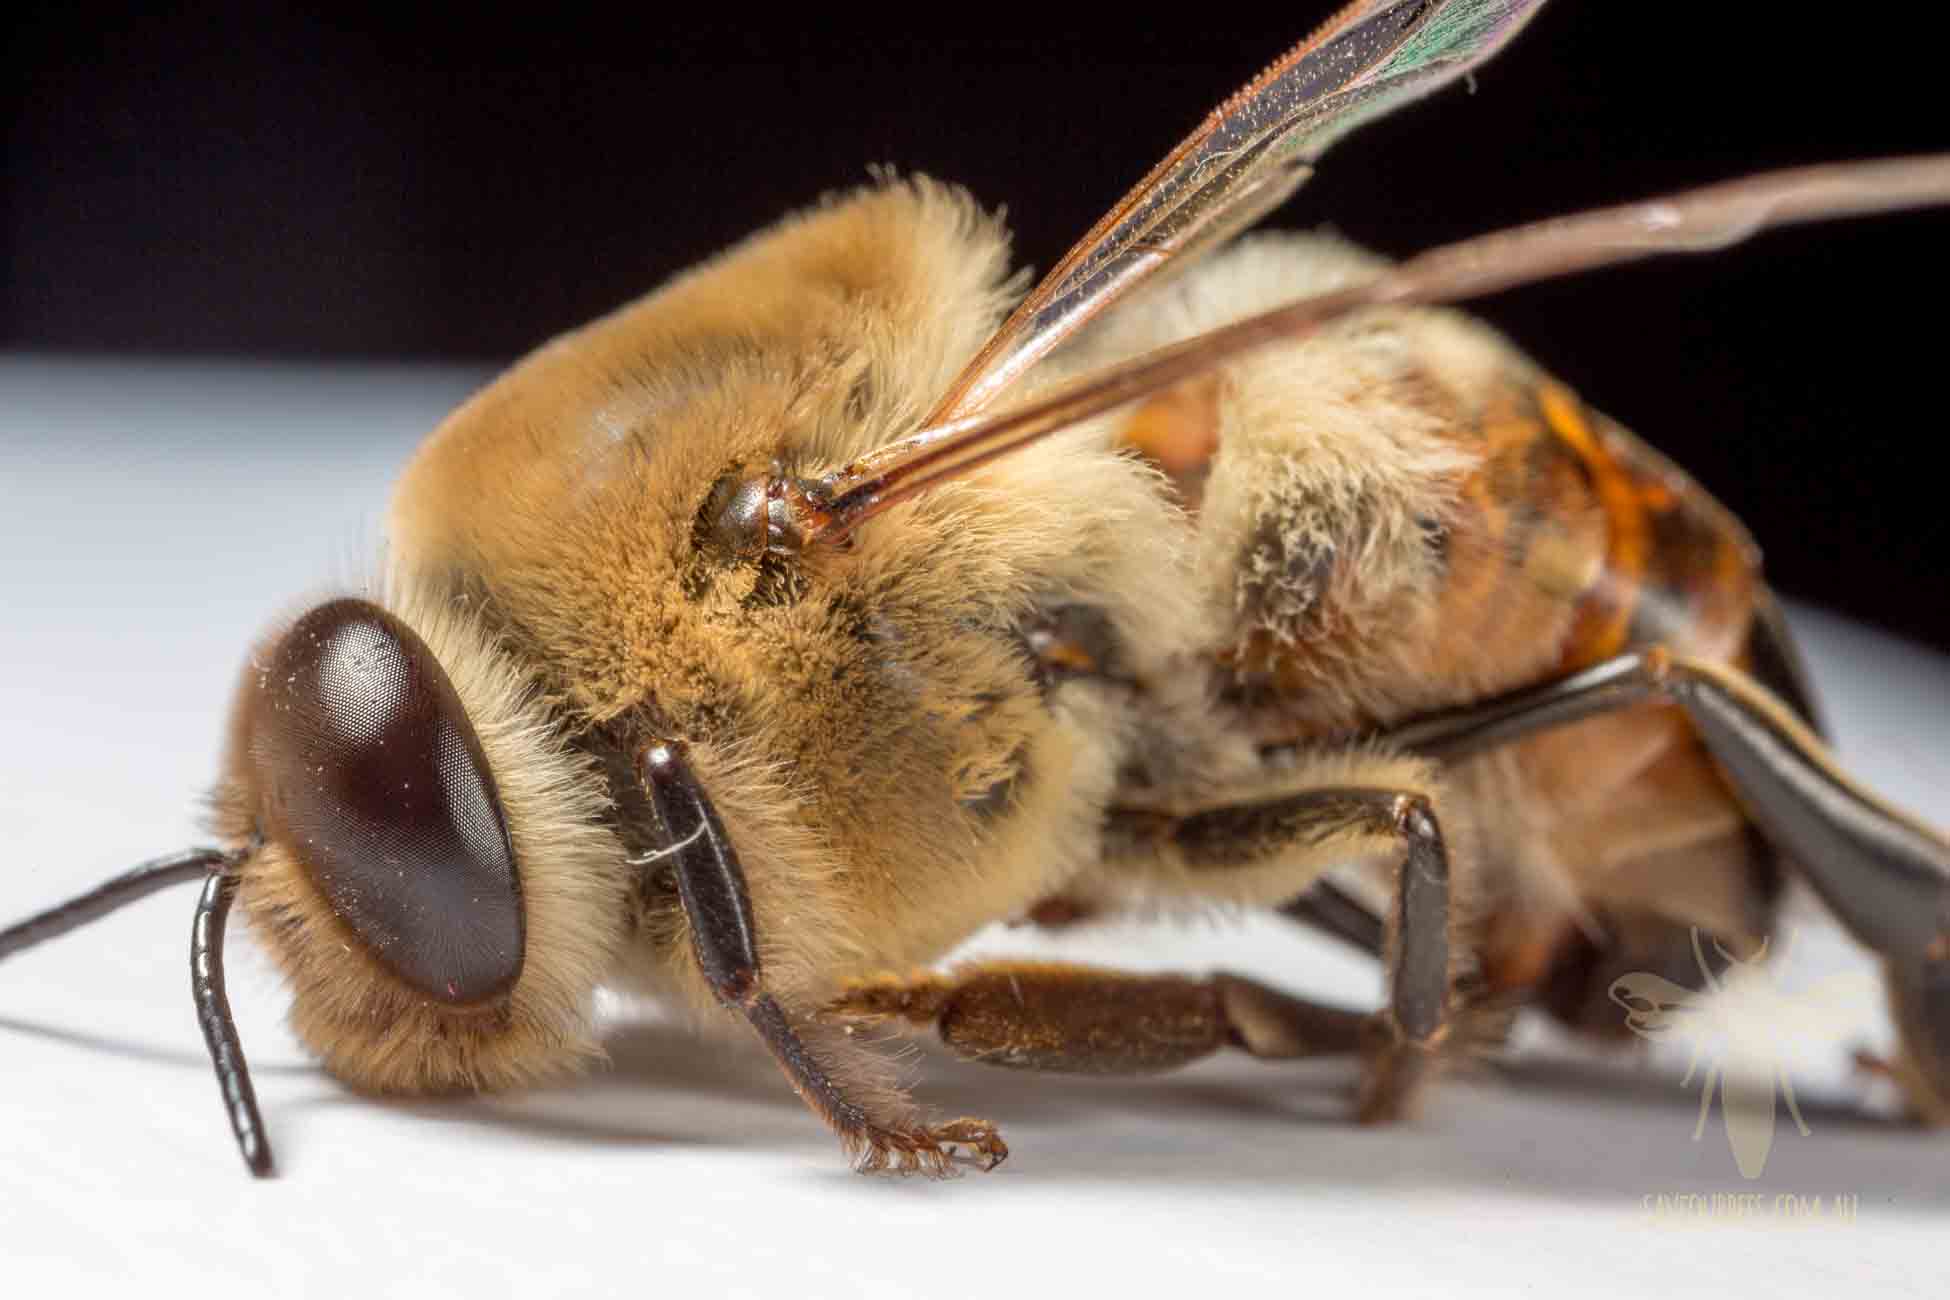 Drone Honey Bee: Study in Macro – Save Our Bees Australia